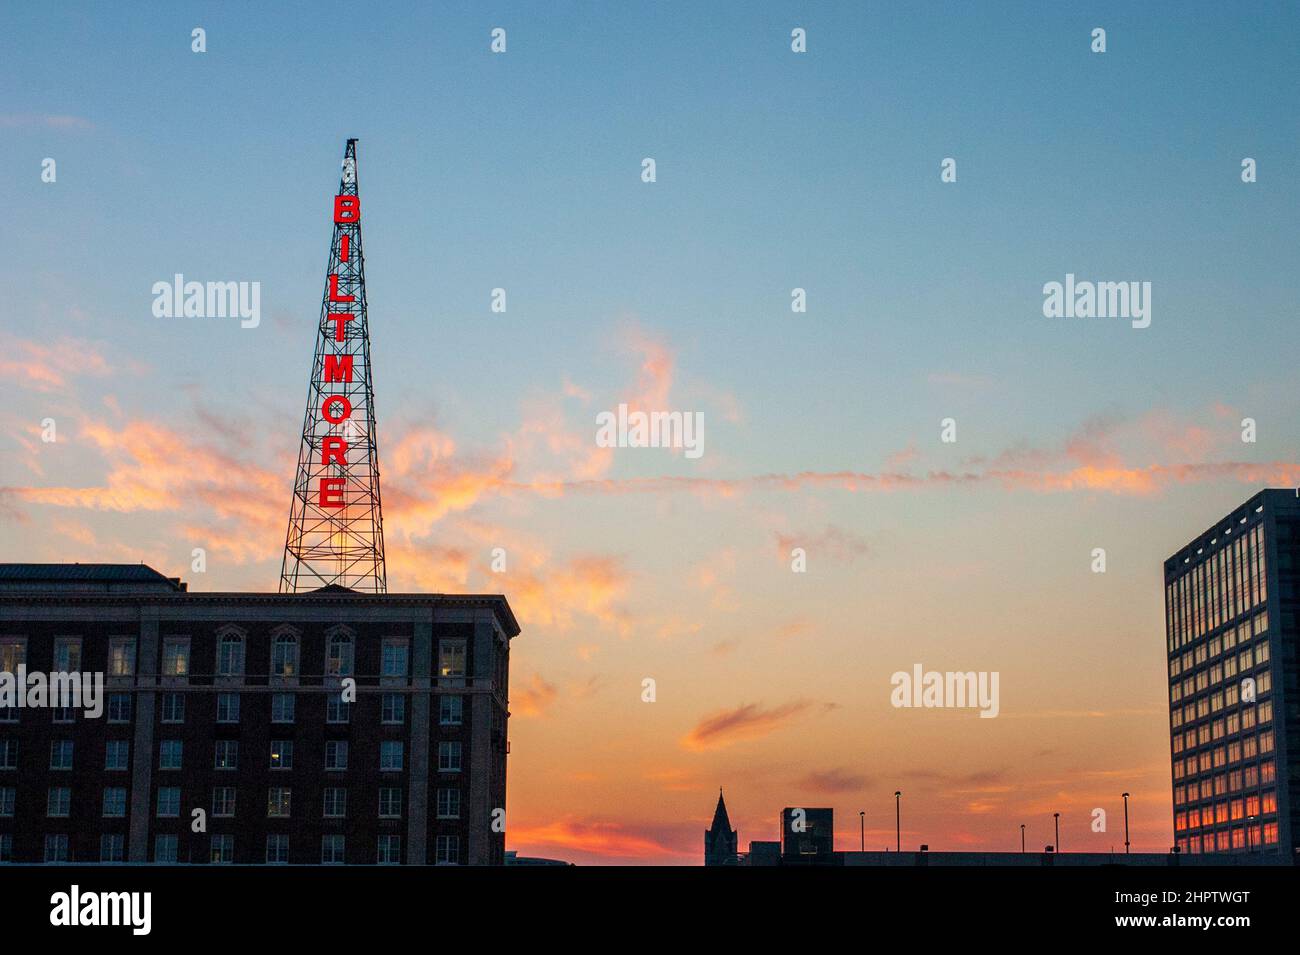 Biltmore WSB transmission Tower at Sunset: A sunset view of one end of the iconic and historic original WSB radio transmission tower located on the top of this historic Atlanta Hotel, now owned by the Georgia Institute of Technology. Stock Photo